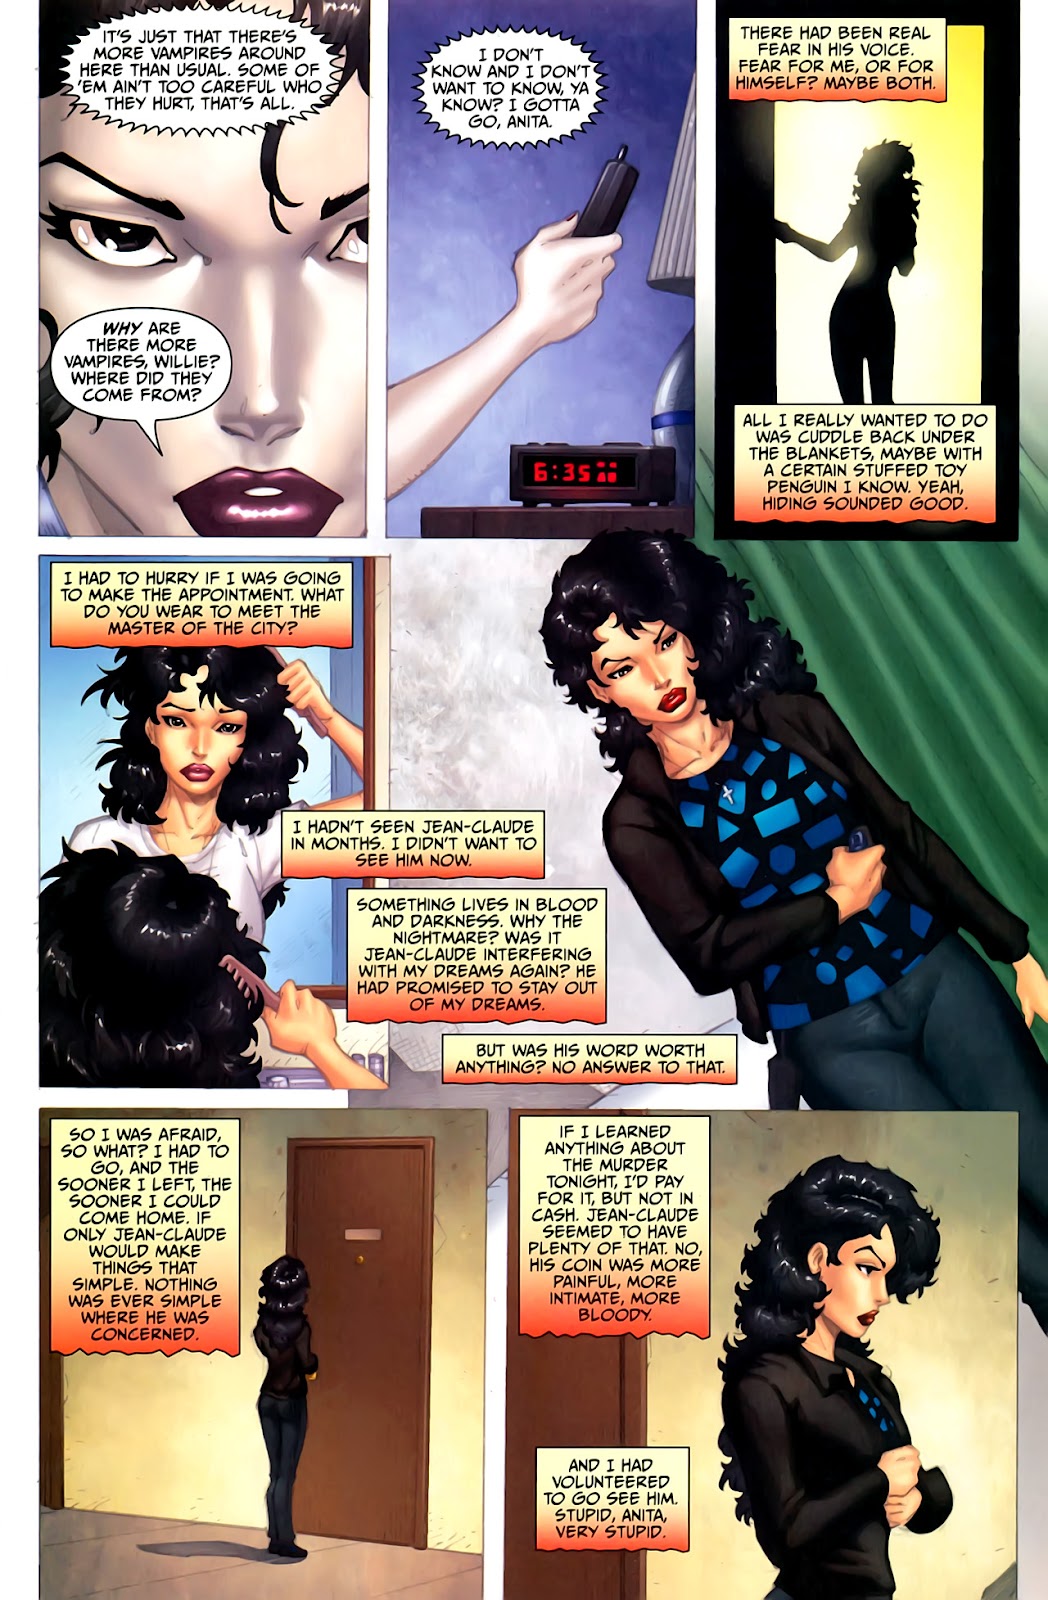 Anita Blake, Vampire Hunter: Circus of the Damned - The Charmer issue 2 - Page 6